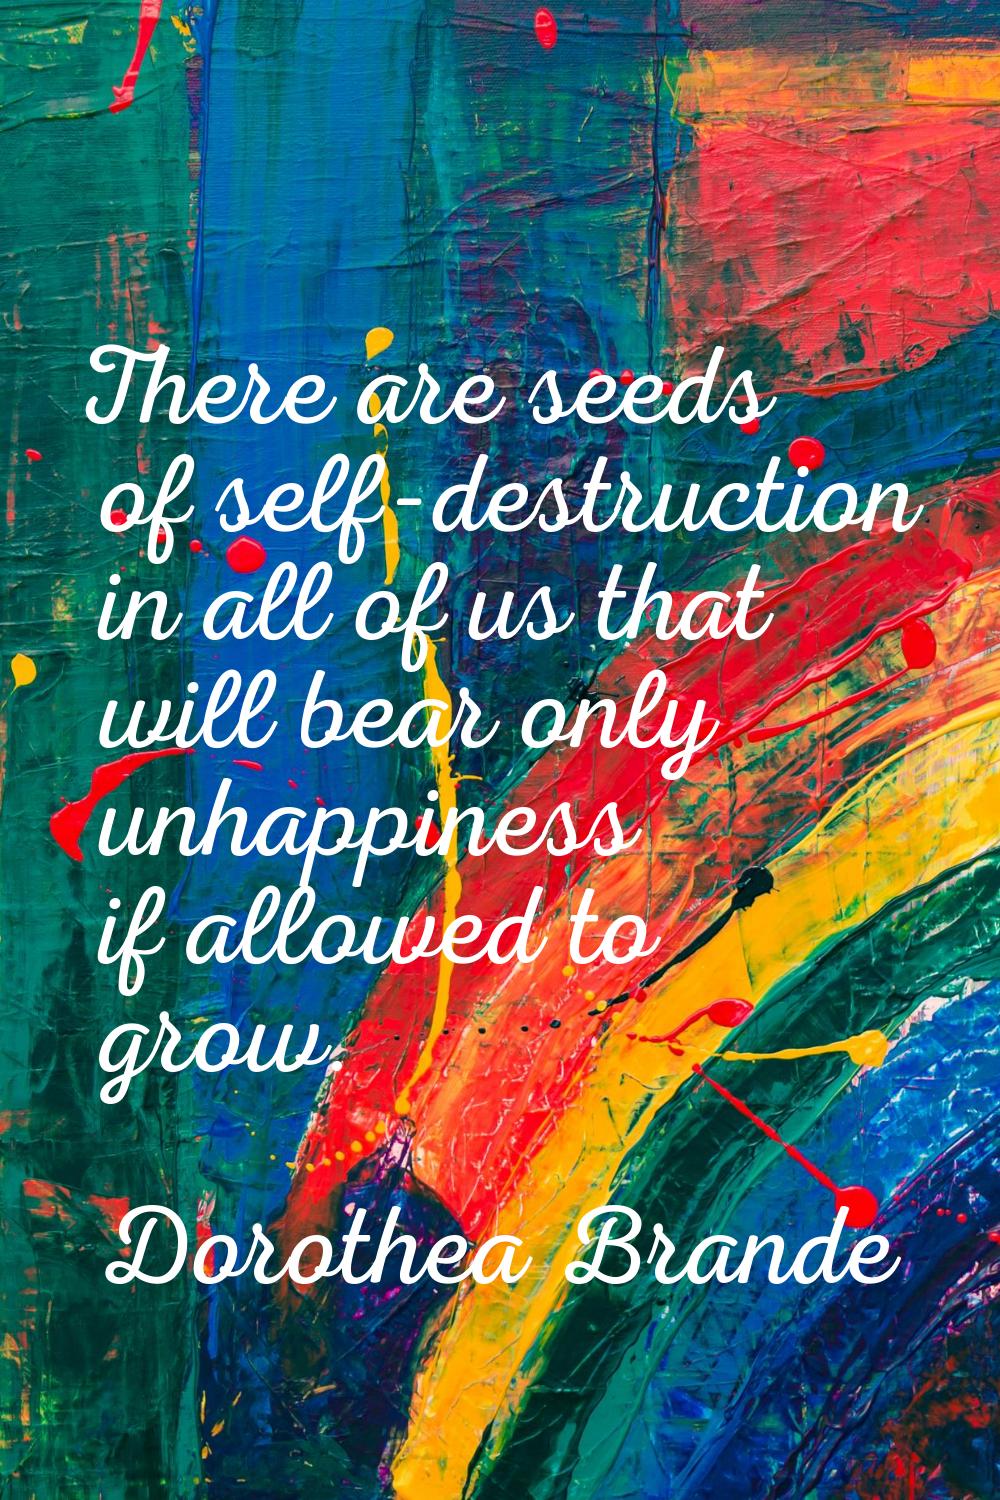 There are seeds of self-destruction in all of us that will bear only unhappiness if allowed to grow